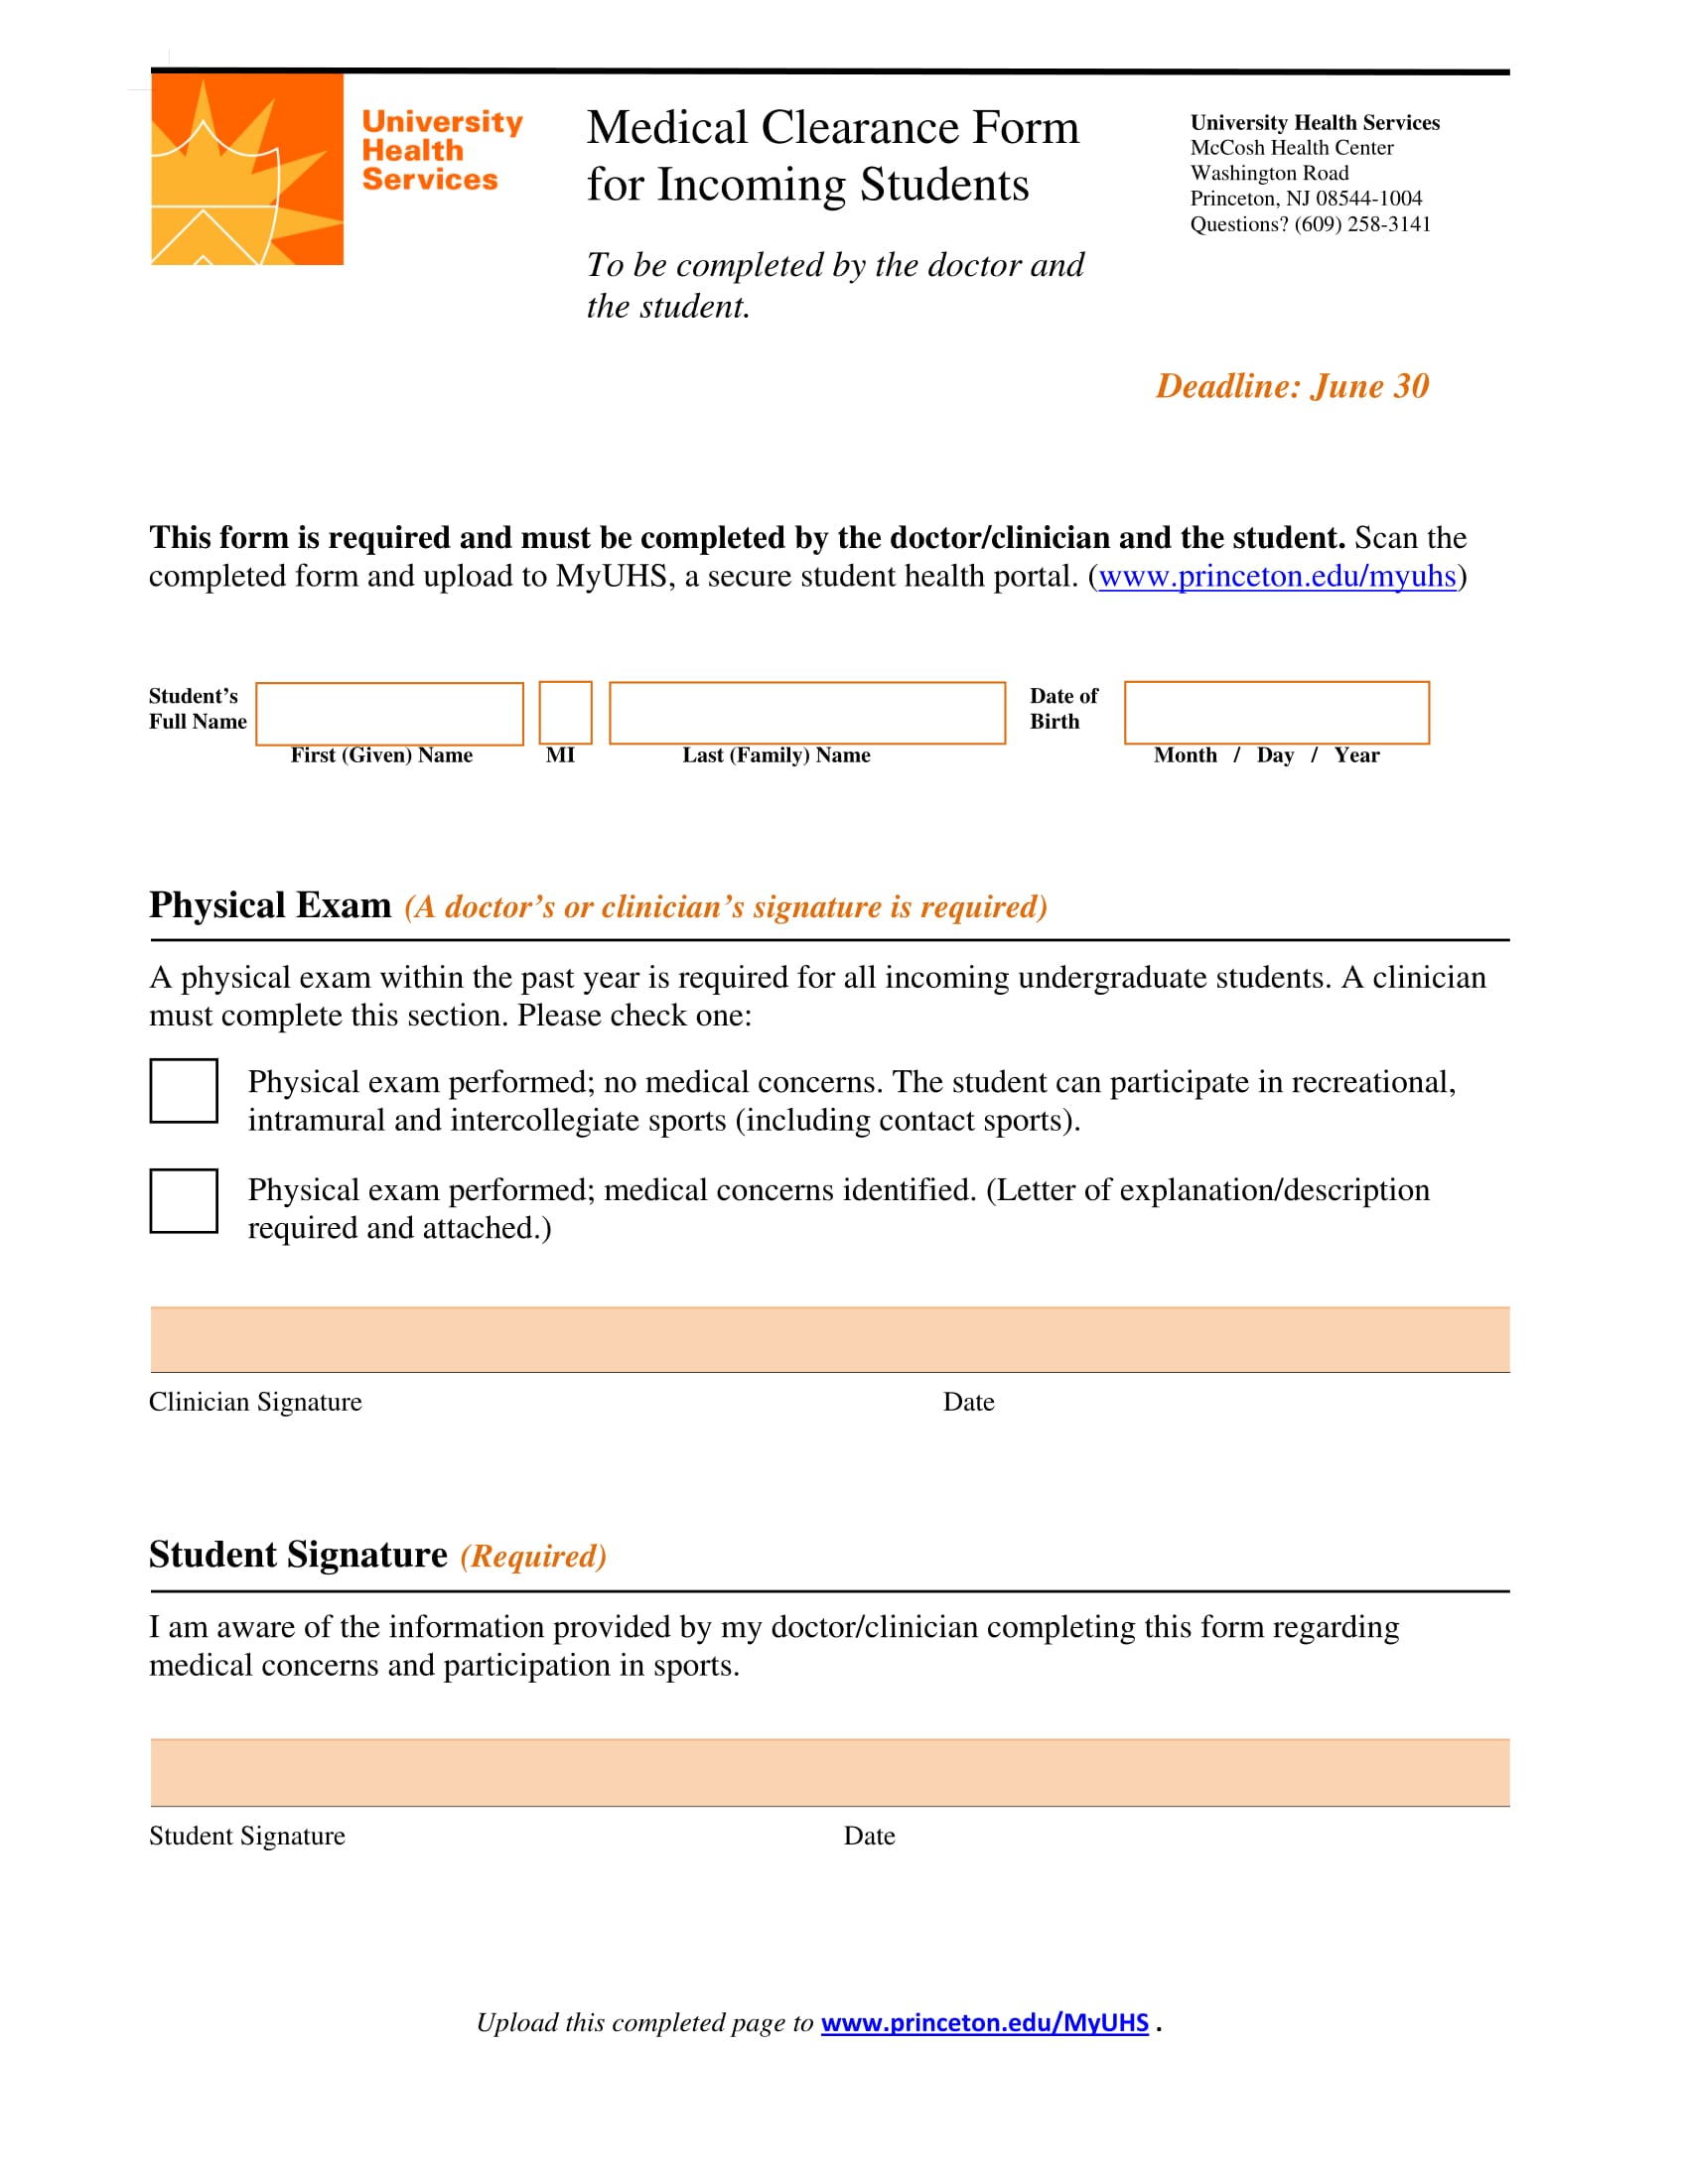 incoming student medical clearance form 1